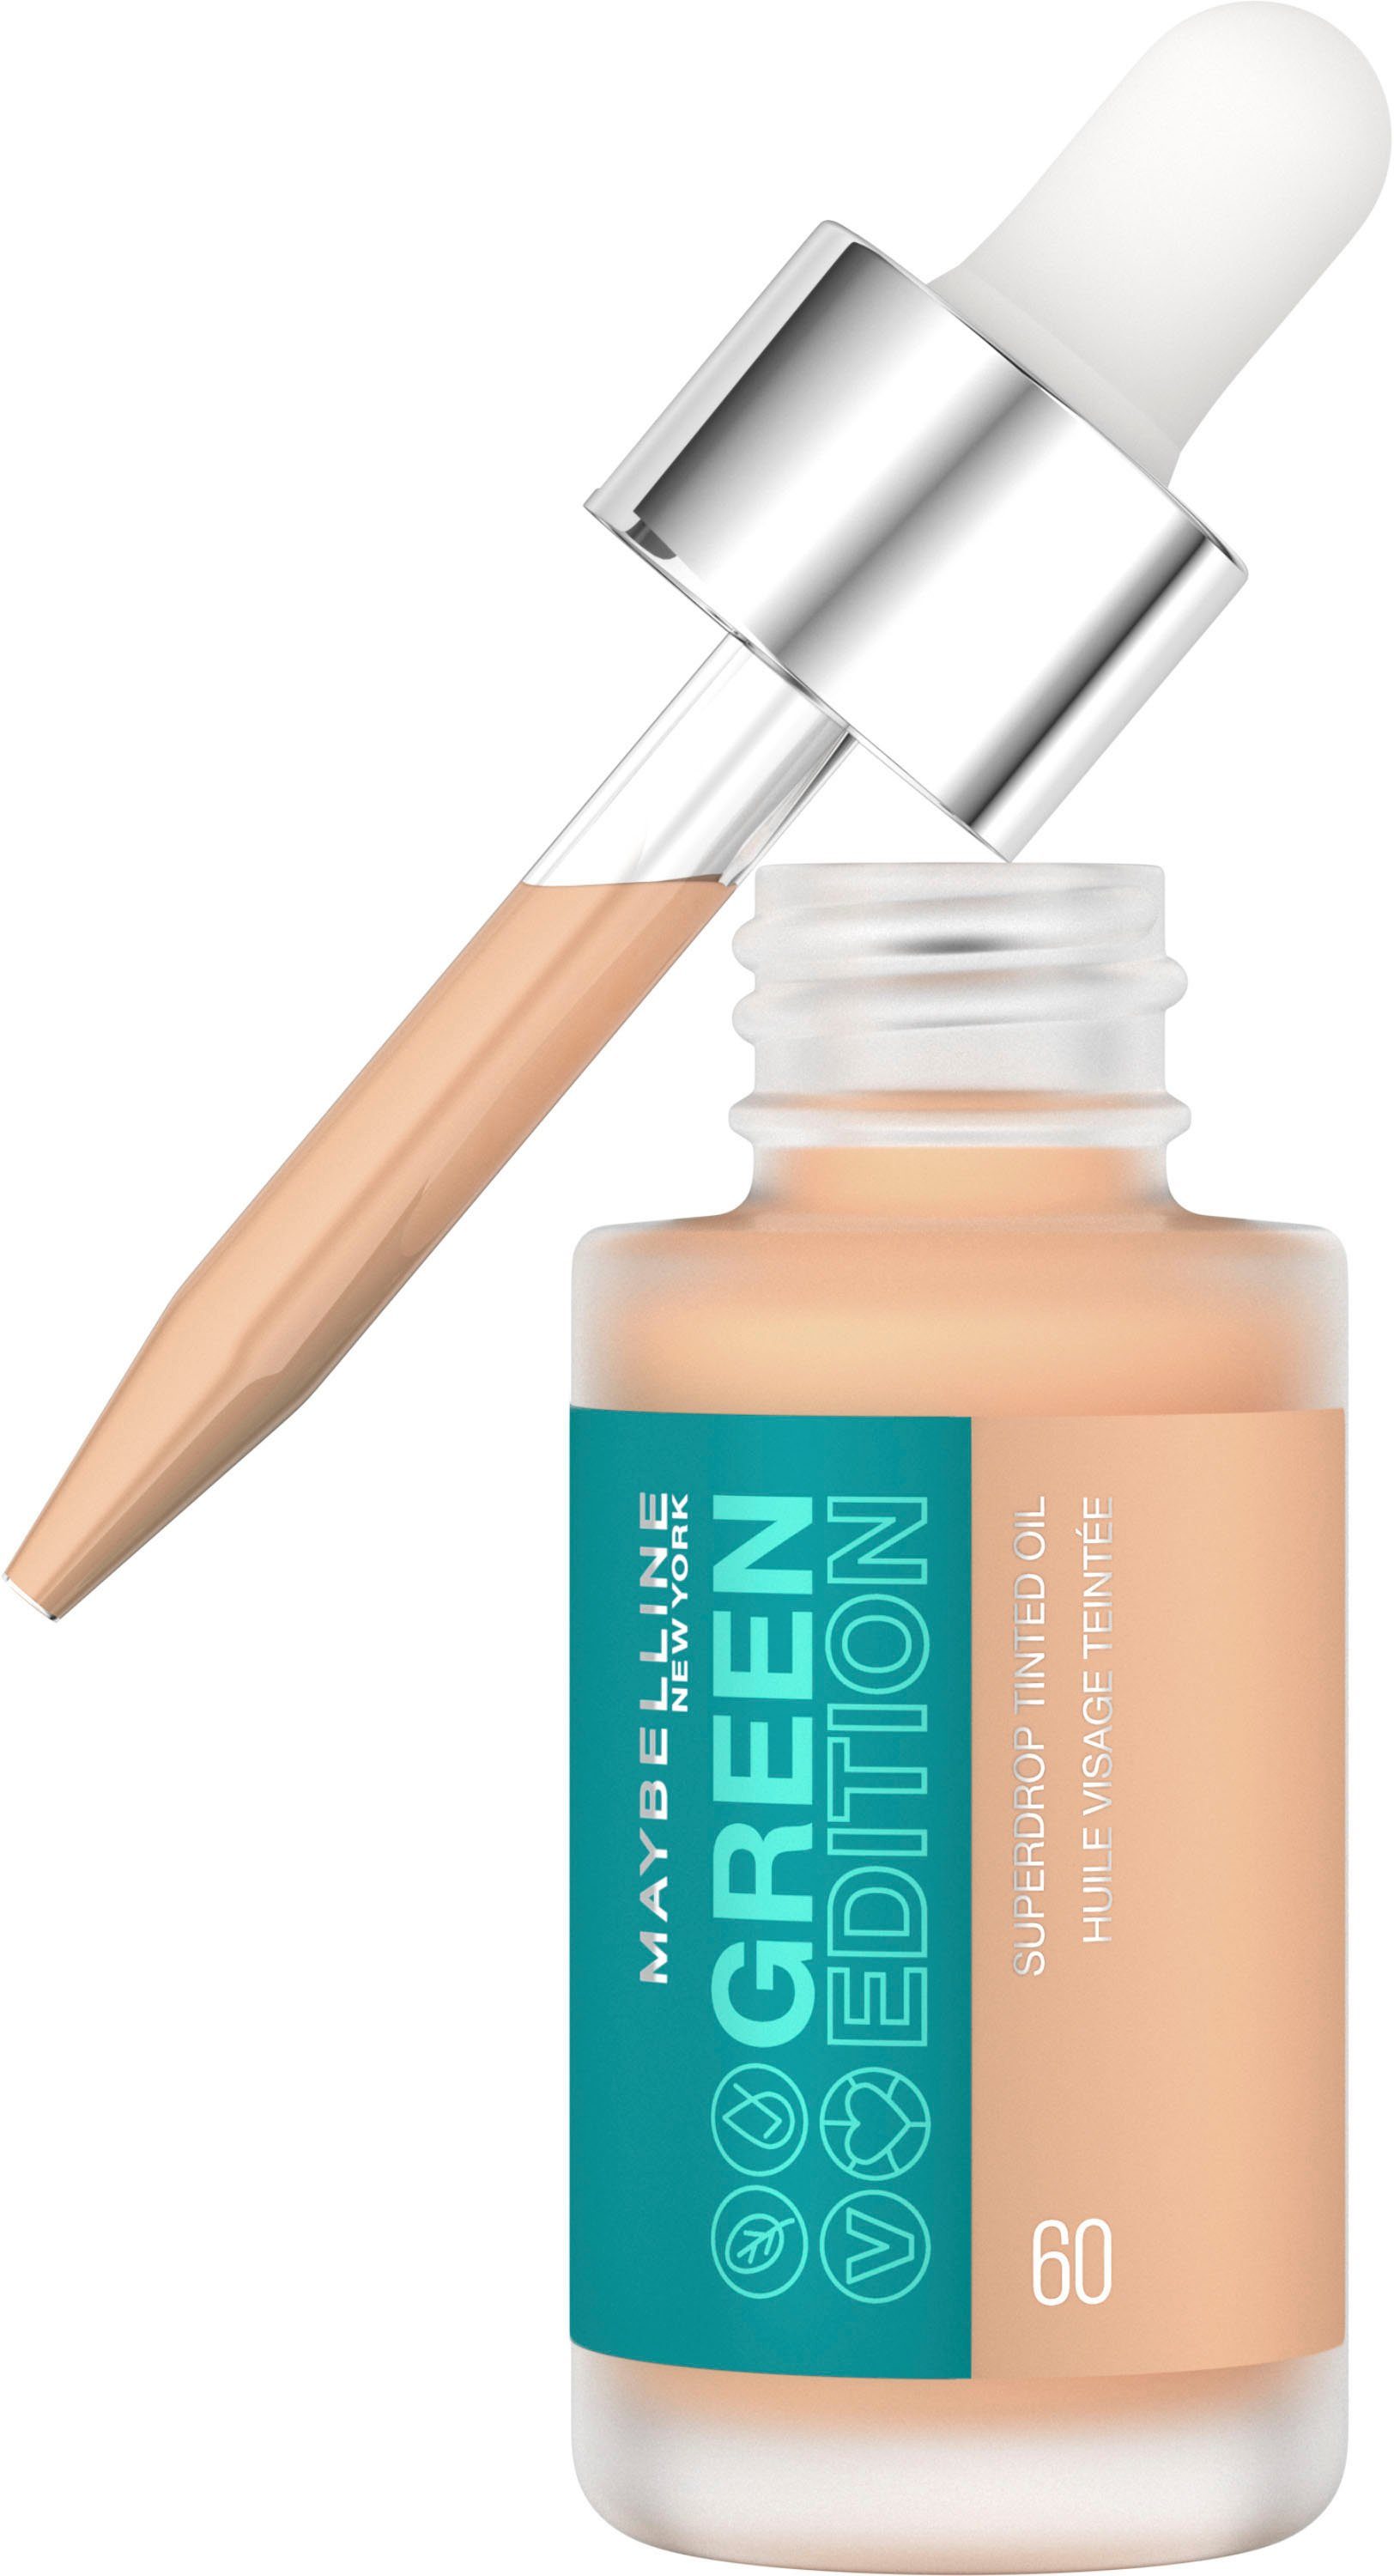 Tinted DRY YORK Superdrop OIL Foundation MAYBELLINE GREEN 60 Oil NEW Dry ED TINT